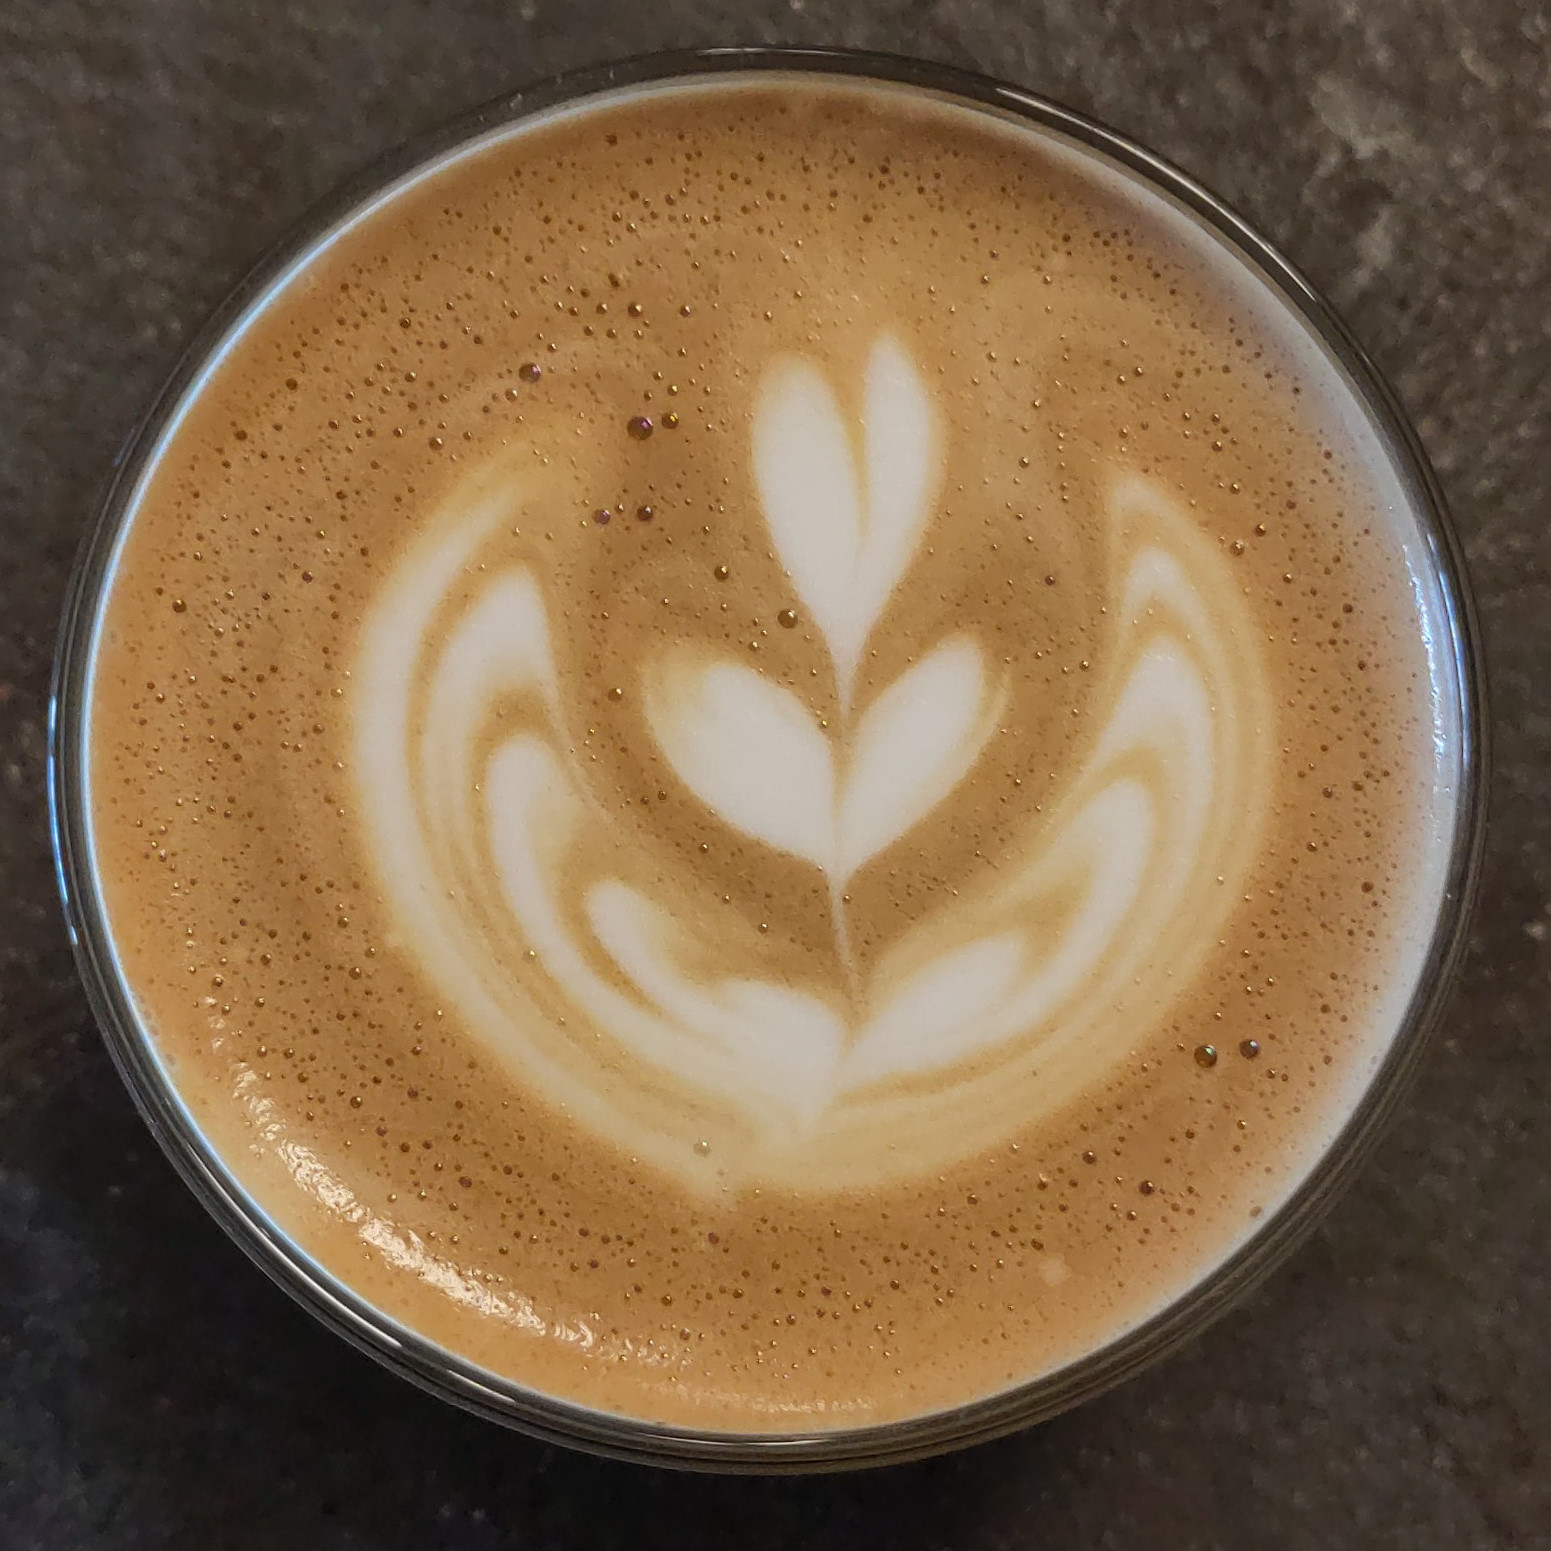 Some lovely latte art in my morning cappuccino, made in my glass KeepCup and served at Mythical North in Scottsdale.